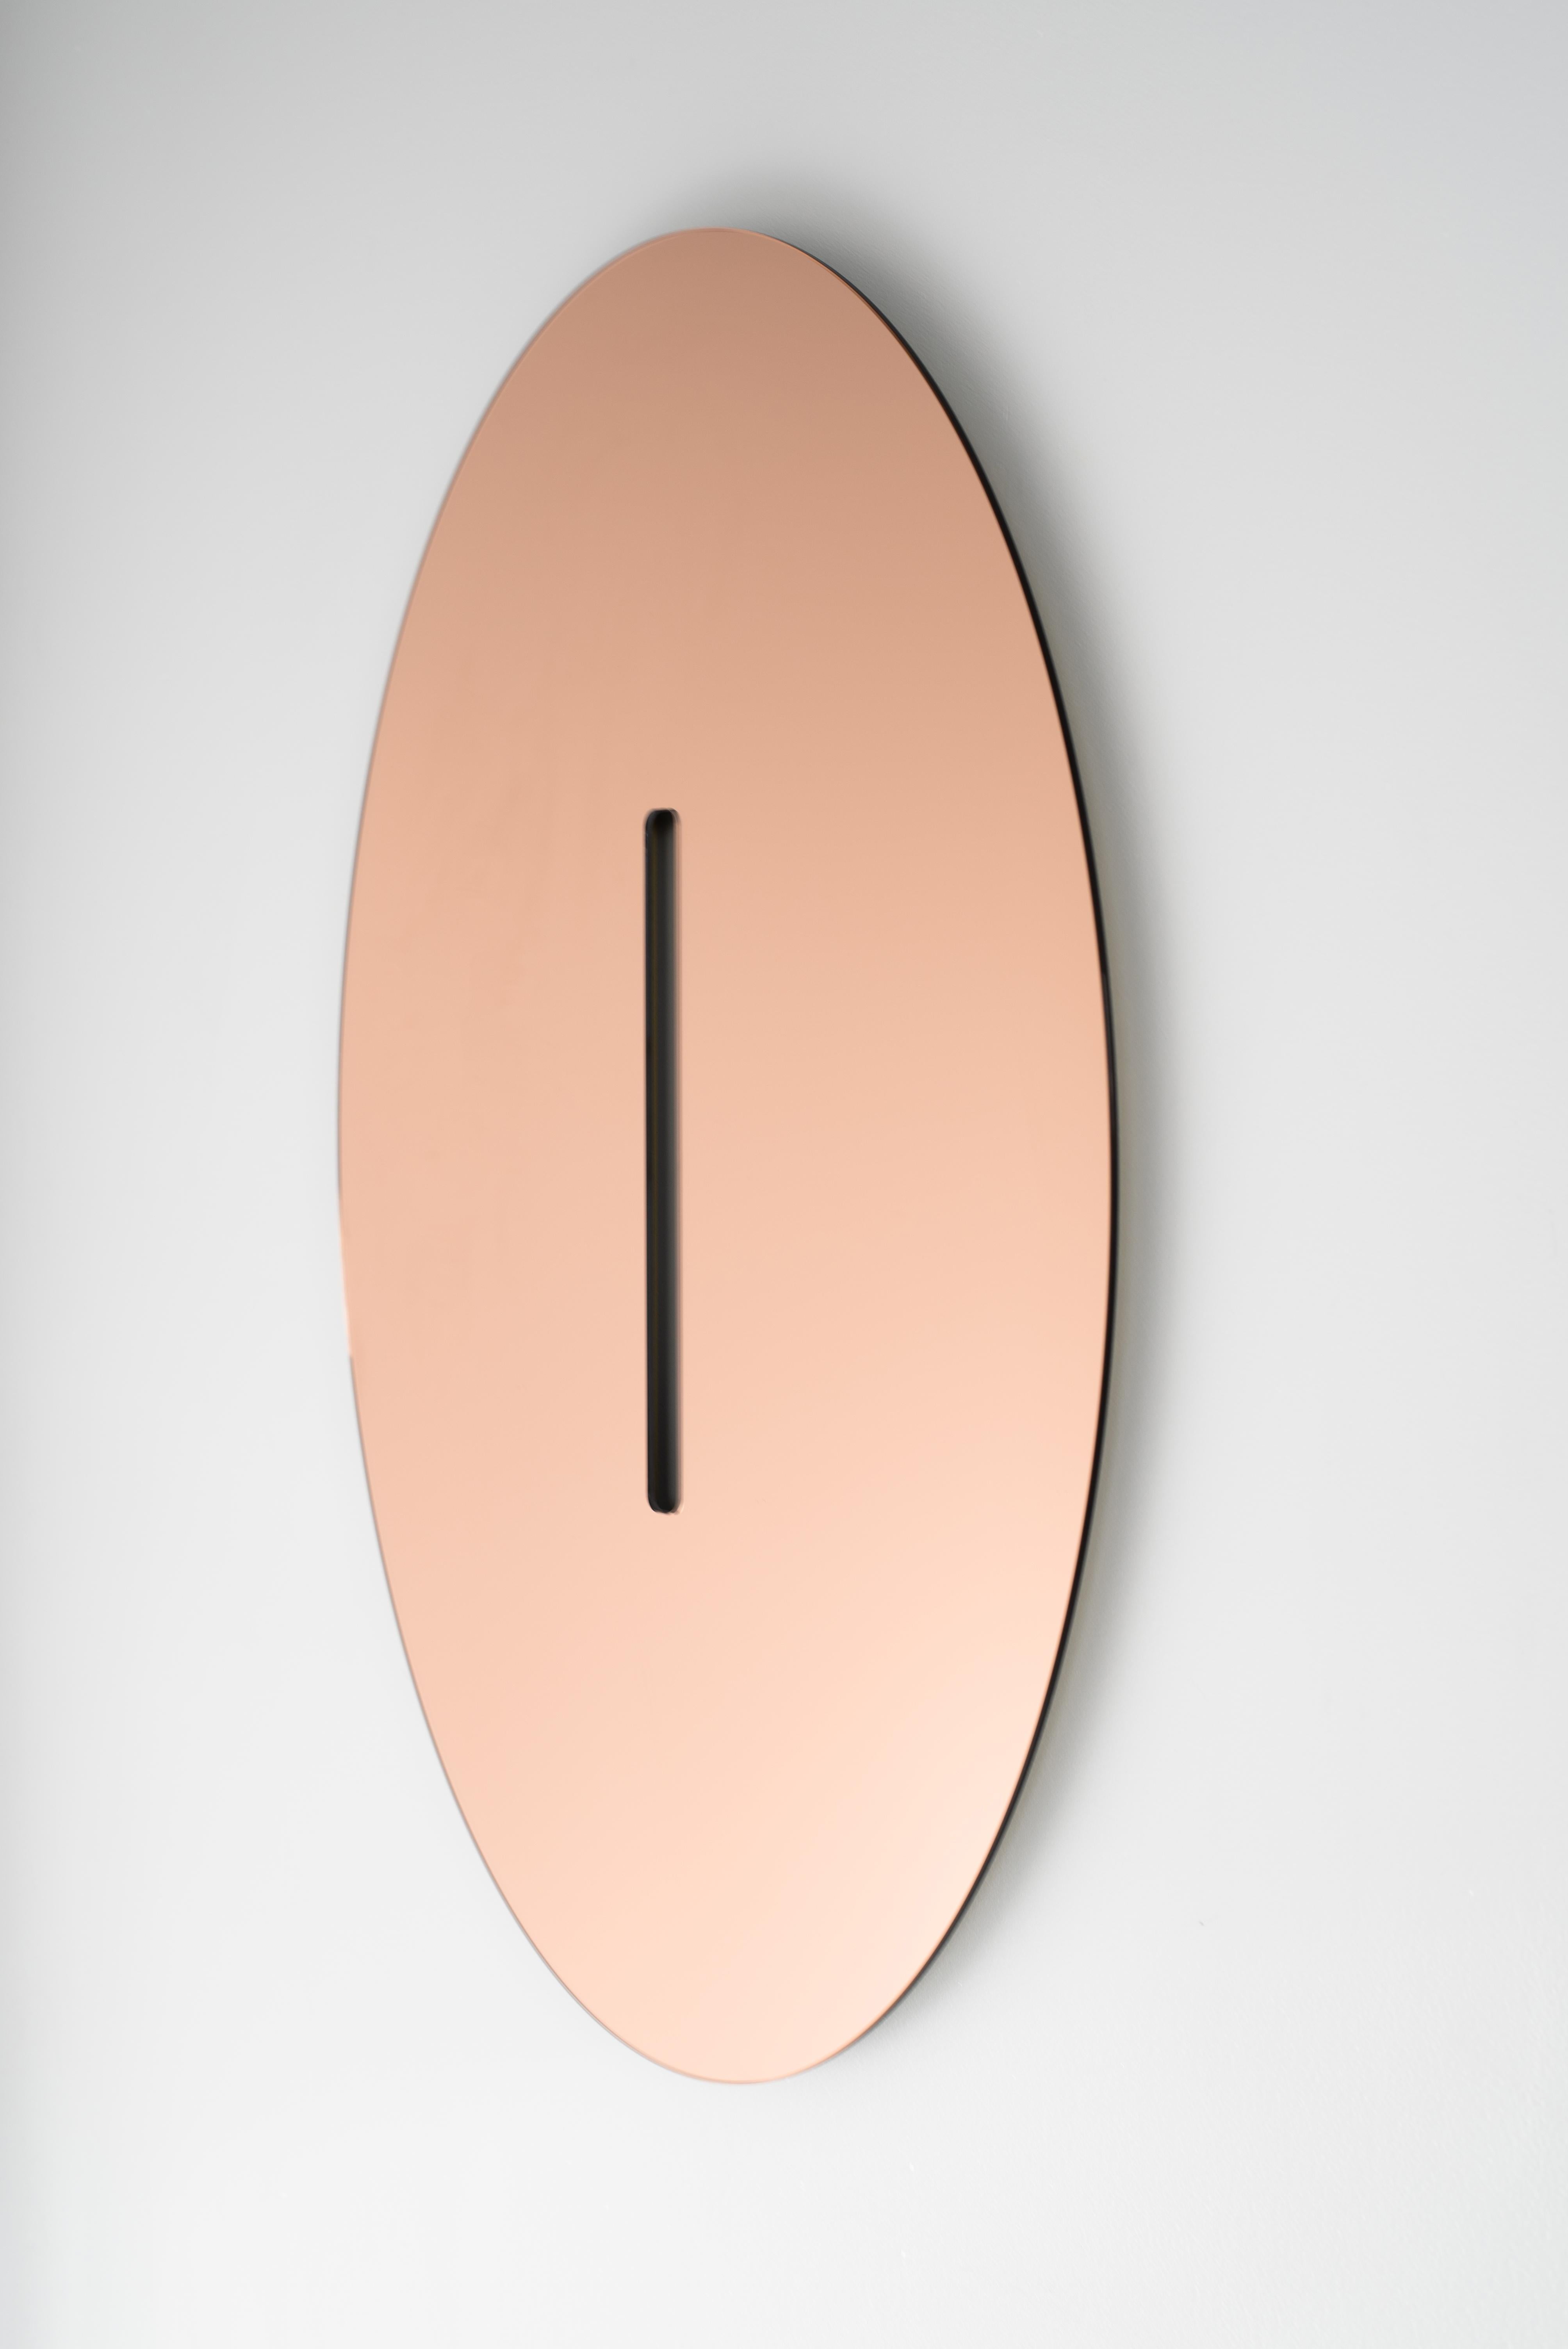 A study in form through mirror, the absence of mirror is the central and subtle focus in this oval shaped piece. Made to order, customization in mirror finish is available. Shown here in Peach Mirror.

Mirror Options -